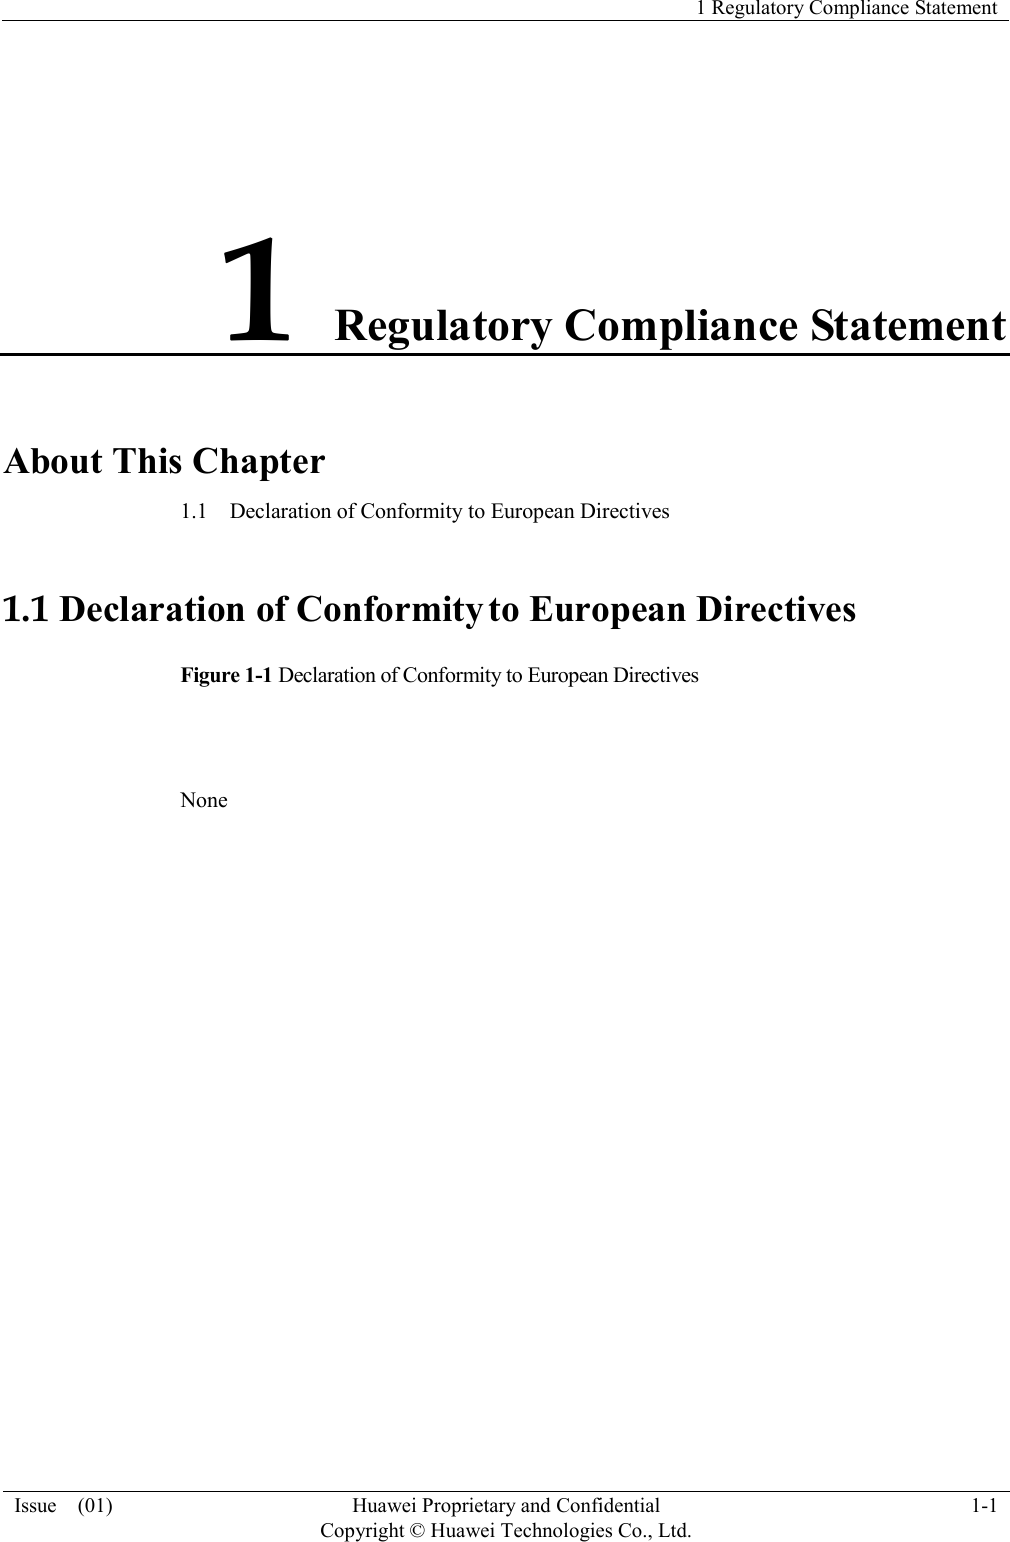   1 Regulatory Compliance Statement  Issue    (01) Huawei Proprietary and Confidential                                     Copyright © Huawei Technologies Co., Ltd. 1-1  1 Regulatory Compliance Statement About This Chapter 1.1    Declaration of Conformity to European Directives 1.1 Declaration of Conformity to European Directives Figure 1-1 Declaration of Conformity to European Directives     None